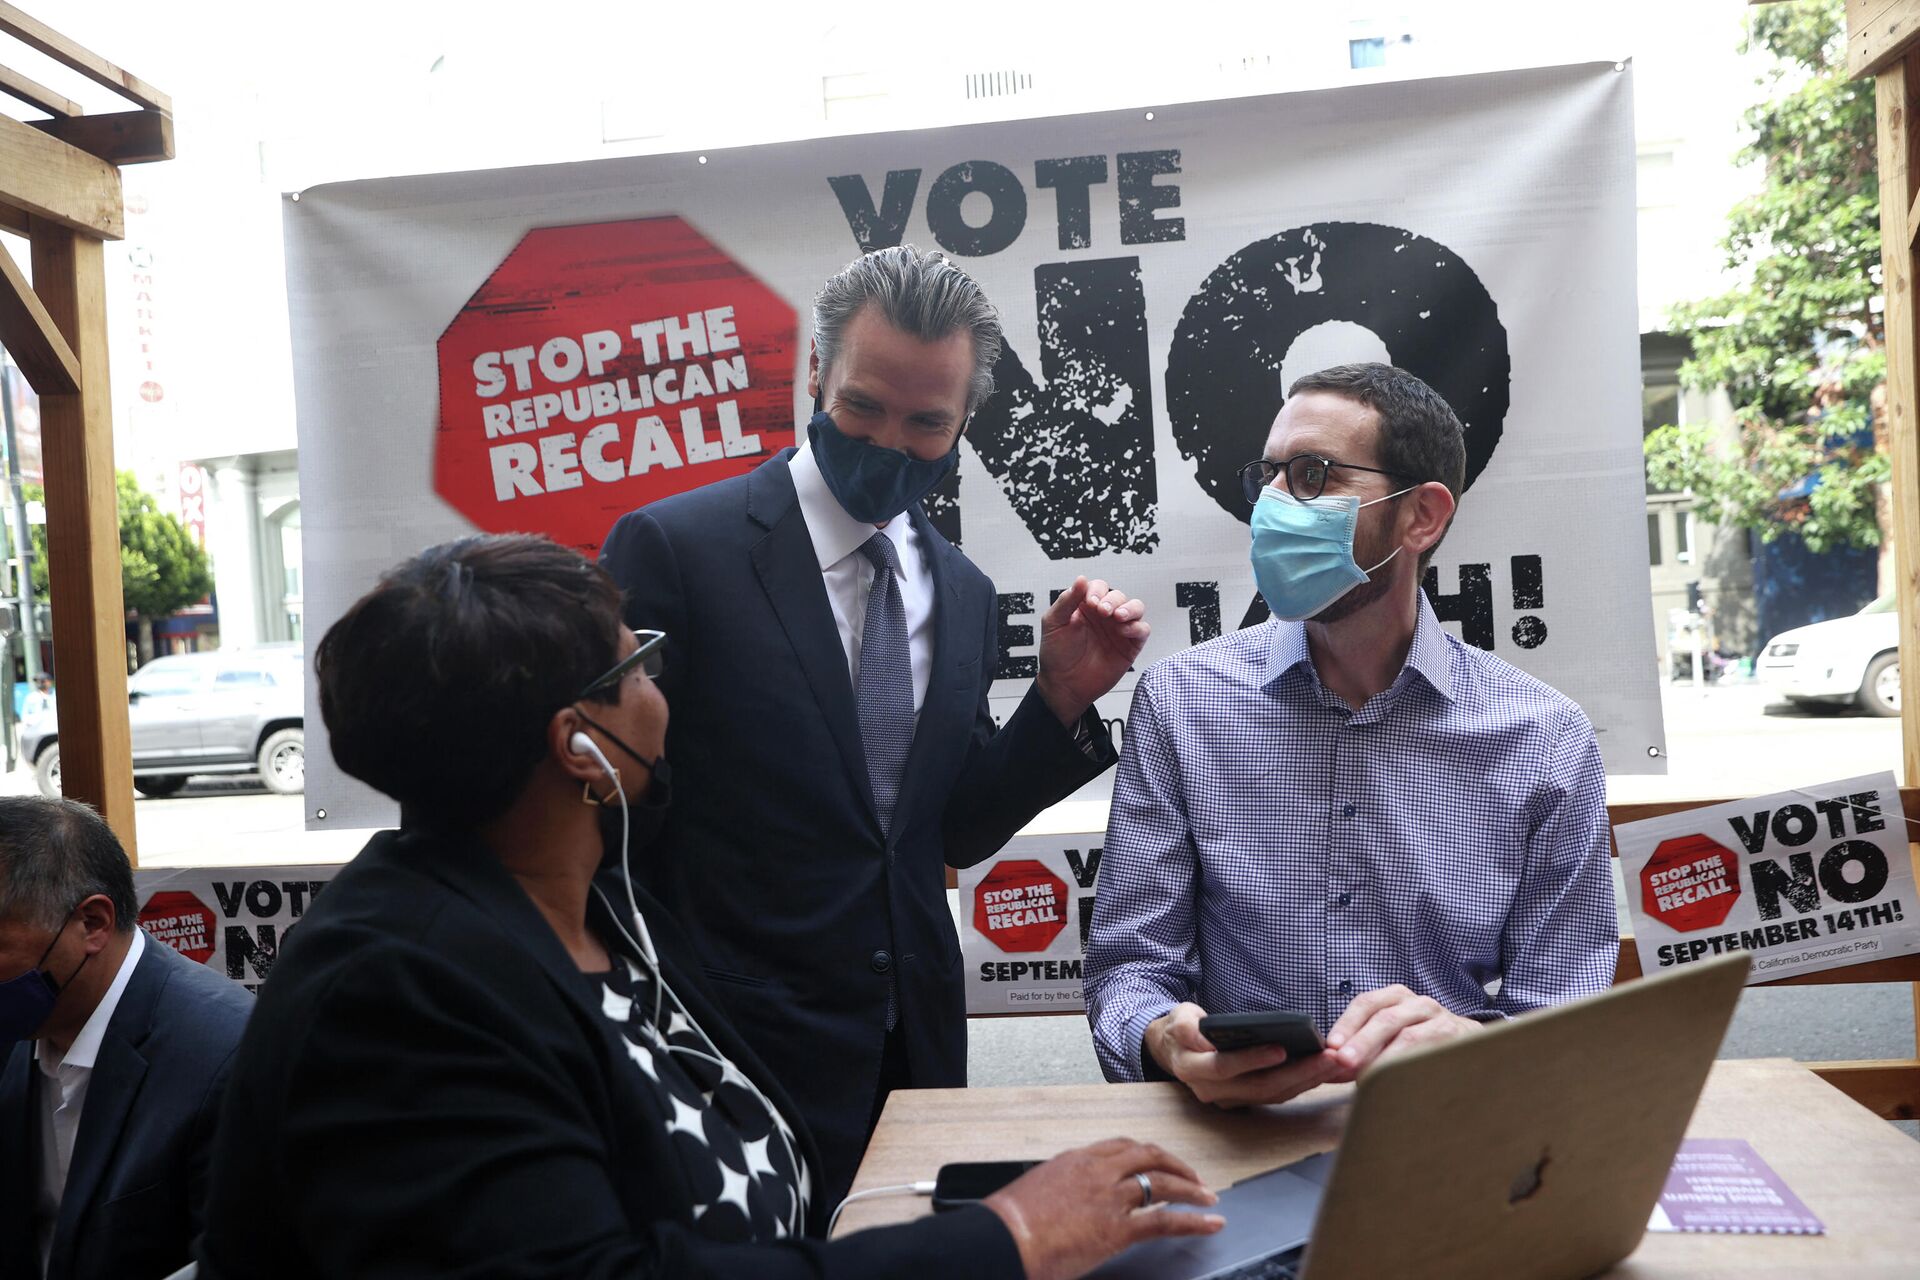 California Gov. Gavin Newsom (C) talks with California State Sen. Scott Wiener (R) and a volunteer (L) who is phone banking against the recall at Manny's on August 13, 2021 in San Francisco, California. California Gov. Gavin Newsom kicked off his Say No to recall campaign as he prepares to face a recall election on September 14 - Sputnik International, 1920, 12.09.2021